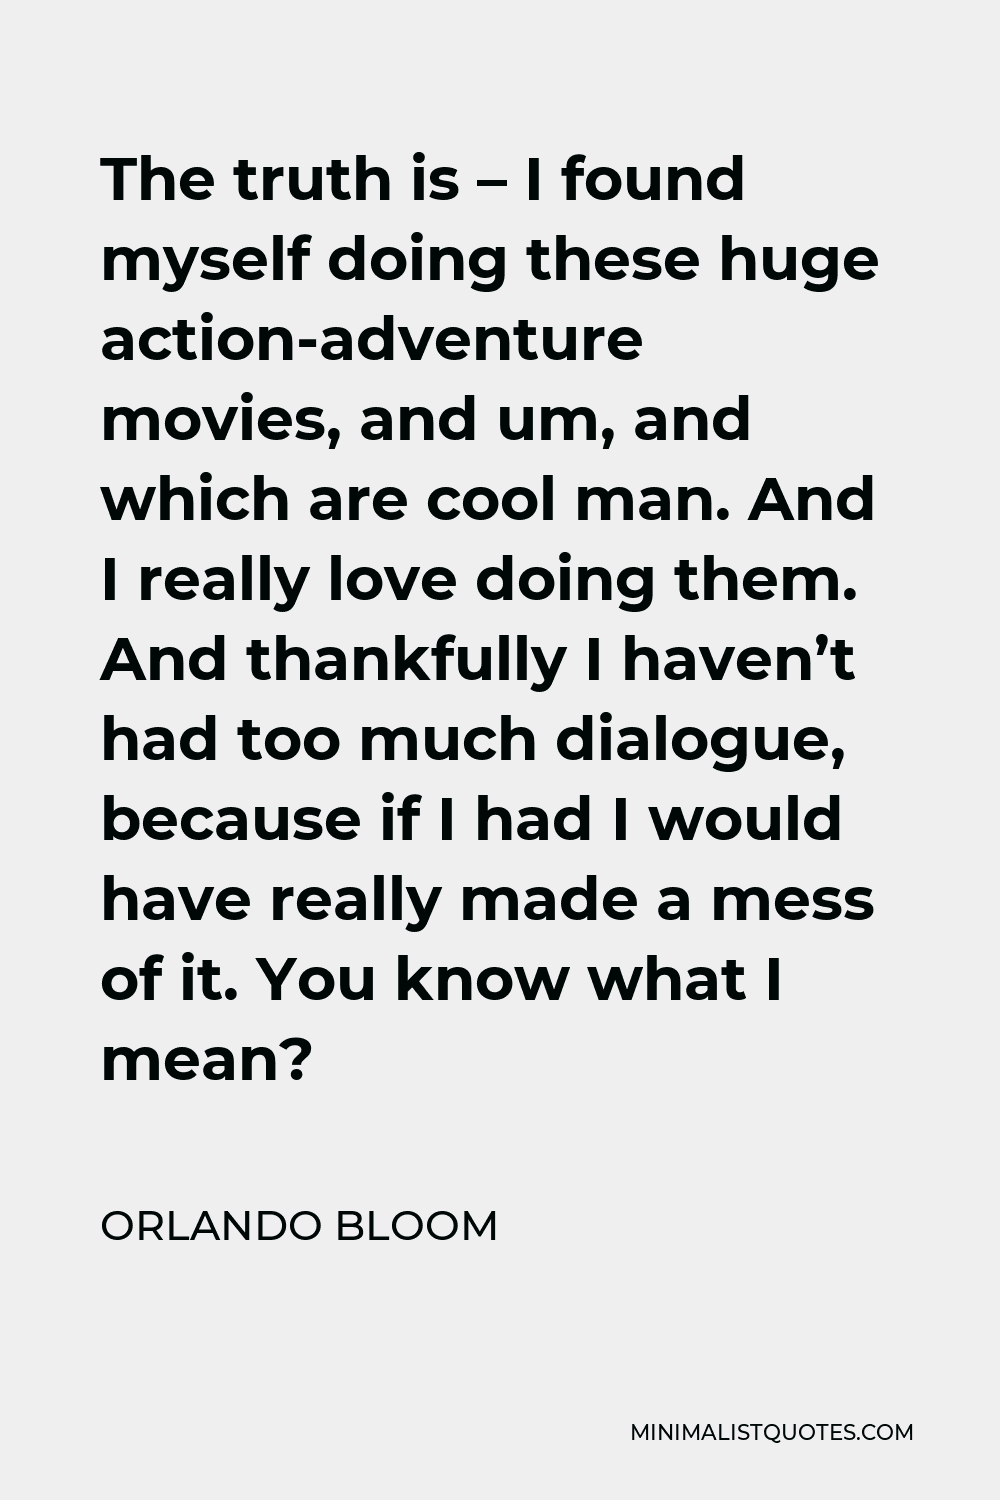 Orlando Bloom Quote - The truth is – I found myself doing these huge action-adventure movies, and um, and which are cool man. And I really love doing them. And thankfully I haven’t had too much dialogue, because if I had I would have really made a mess of it. You know what I mean?